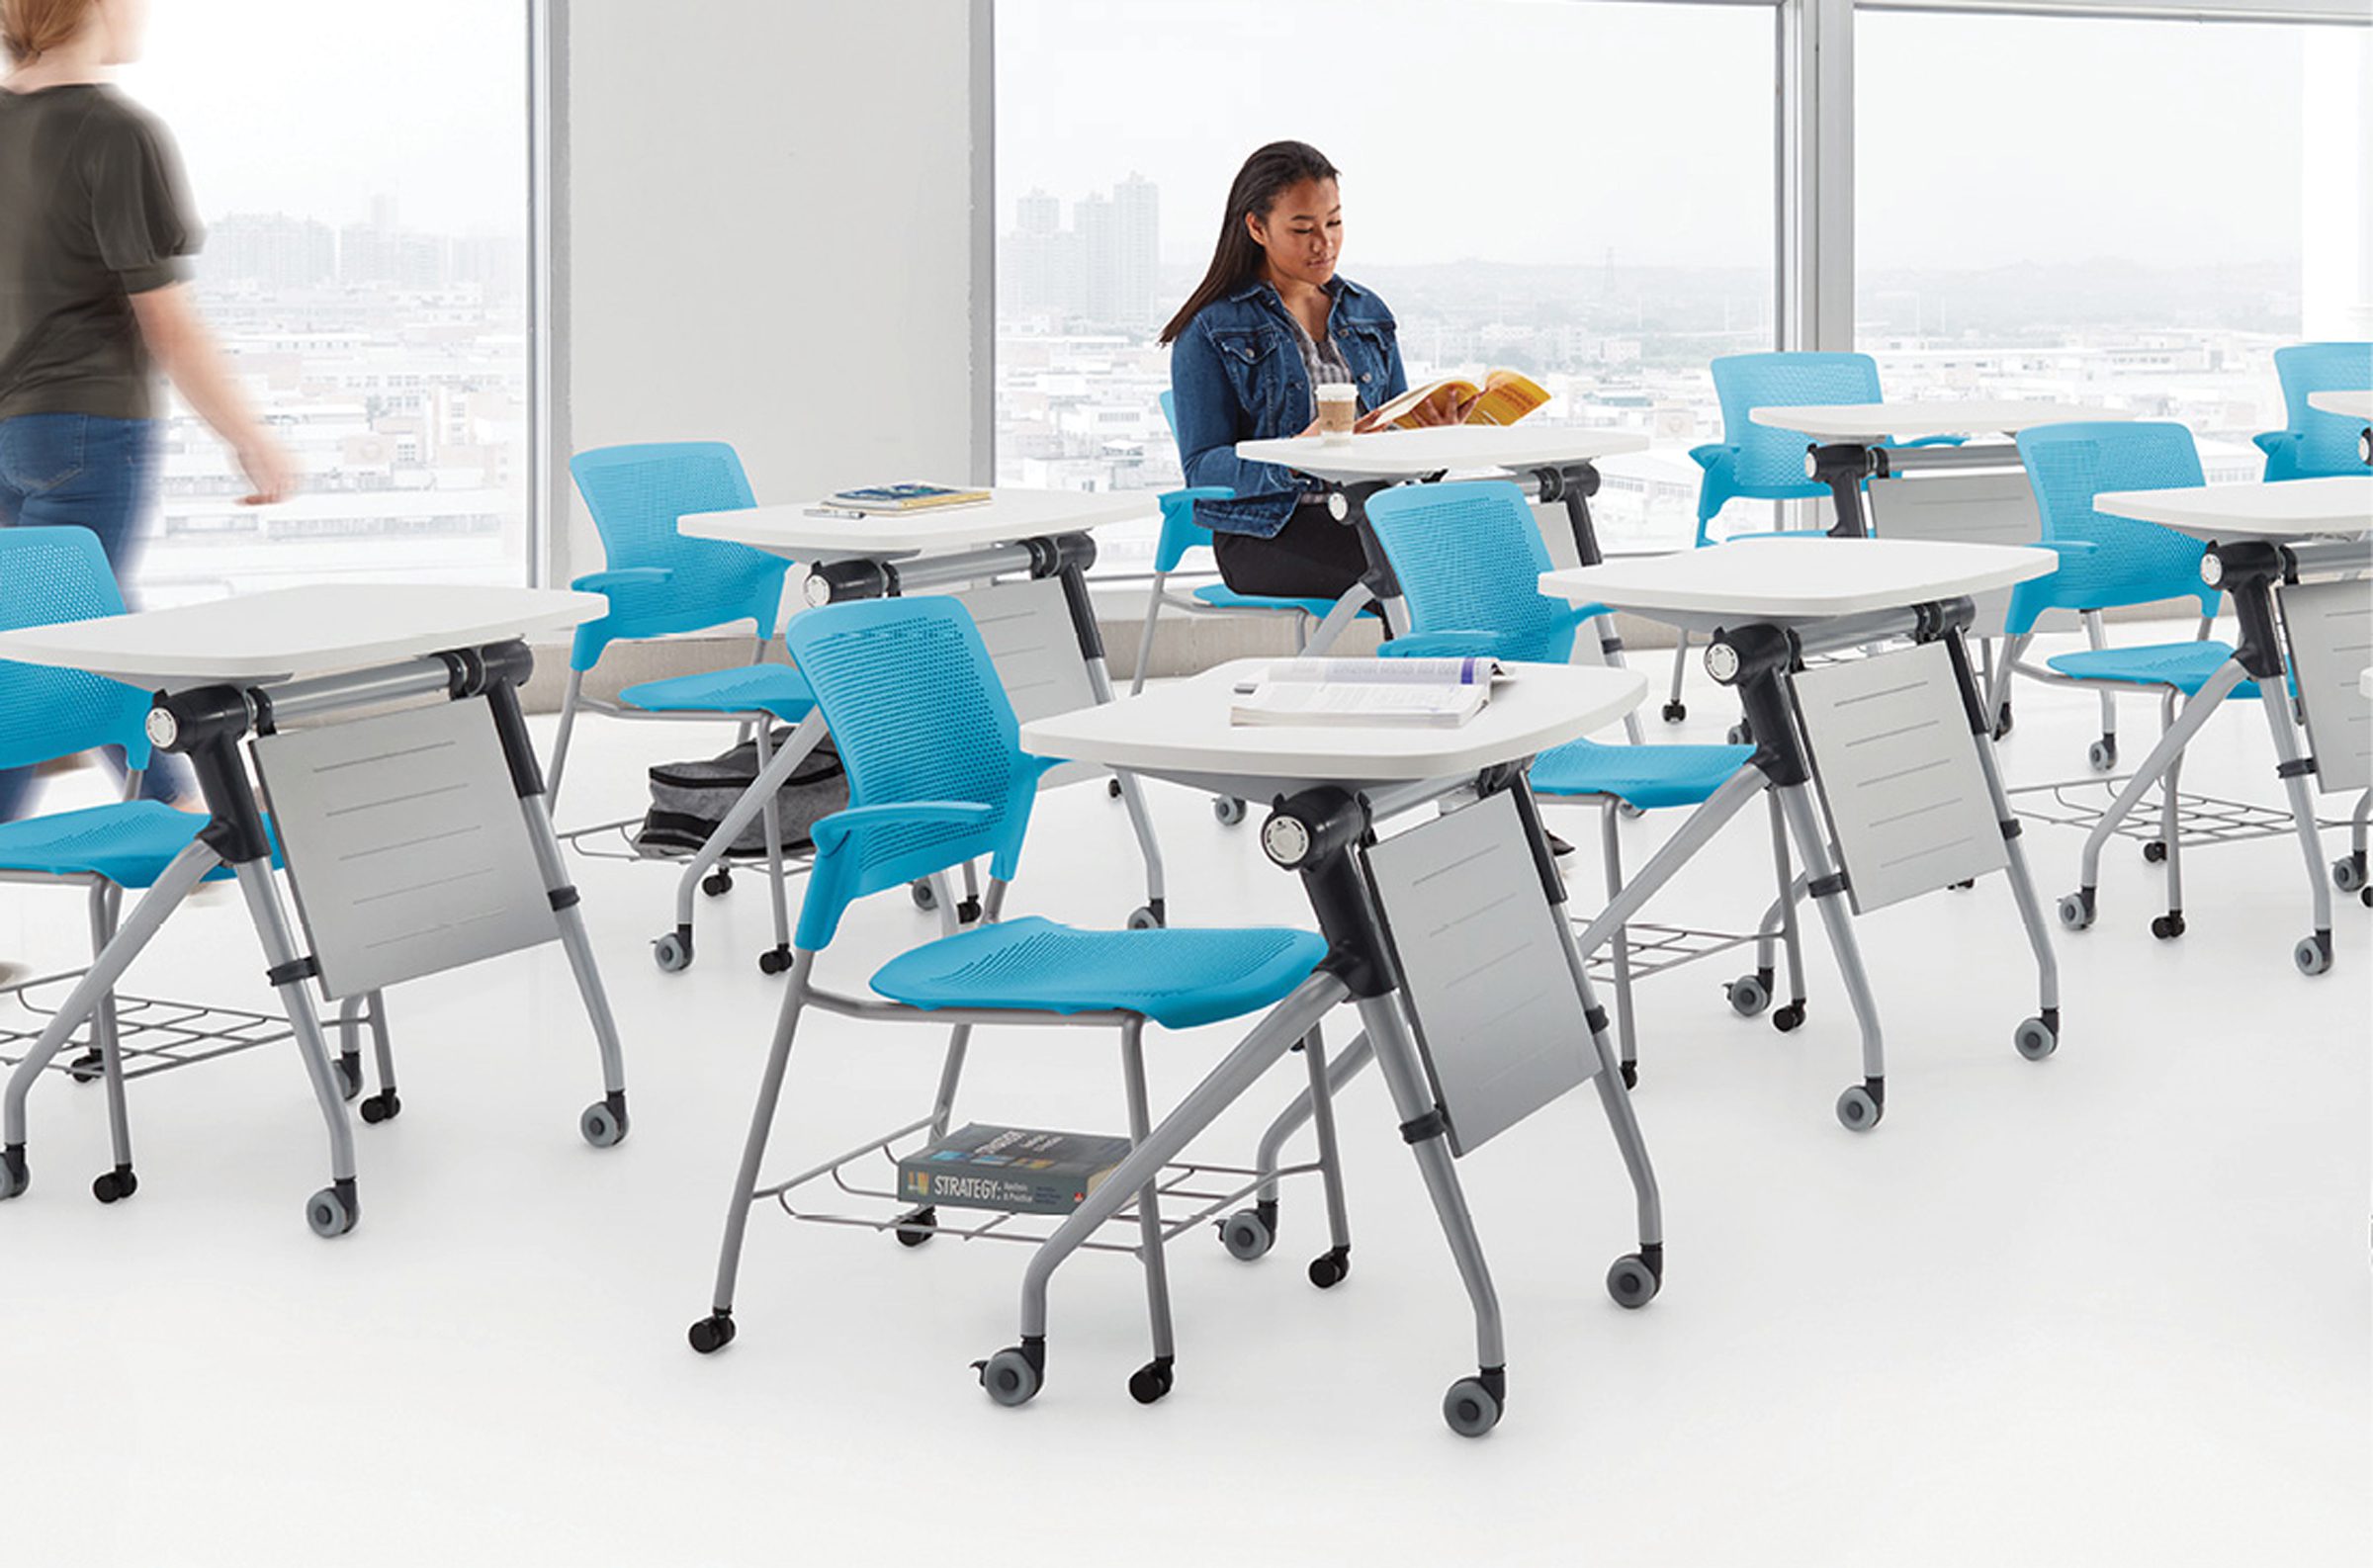 Woman reading a book and drinking coffee in room with two rows of classroom style desks with chairs